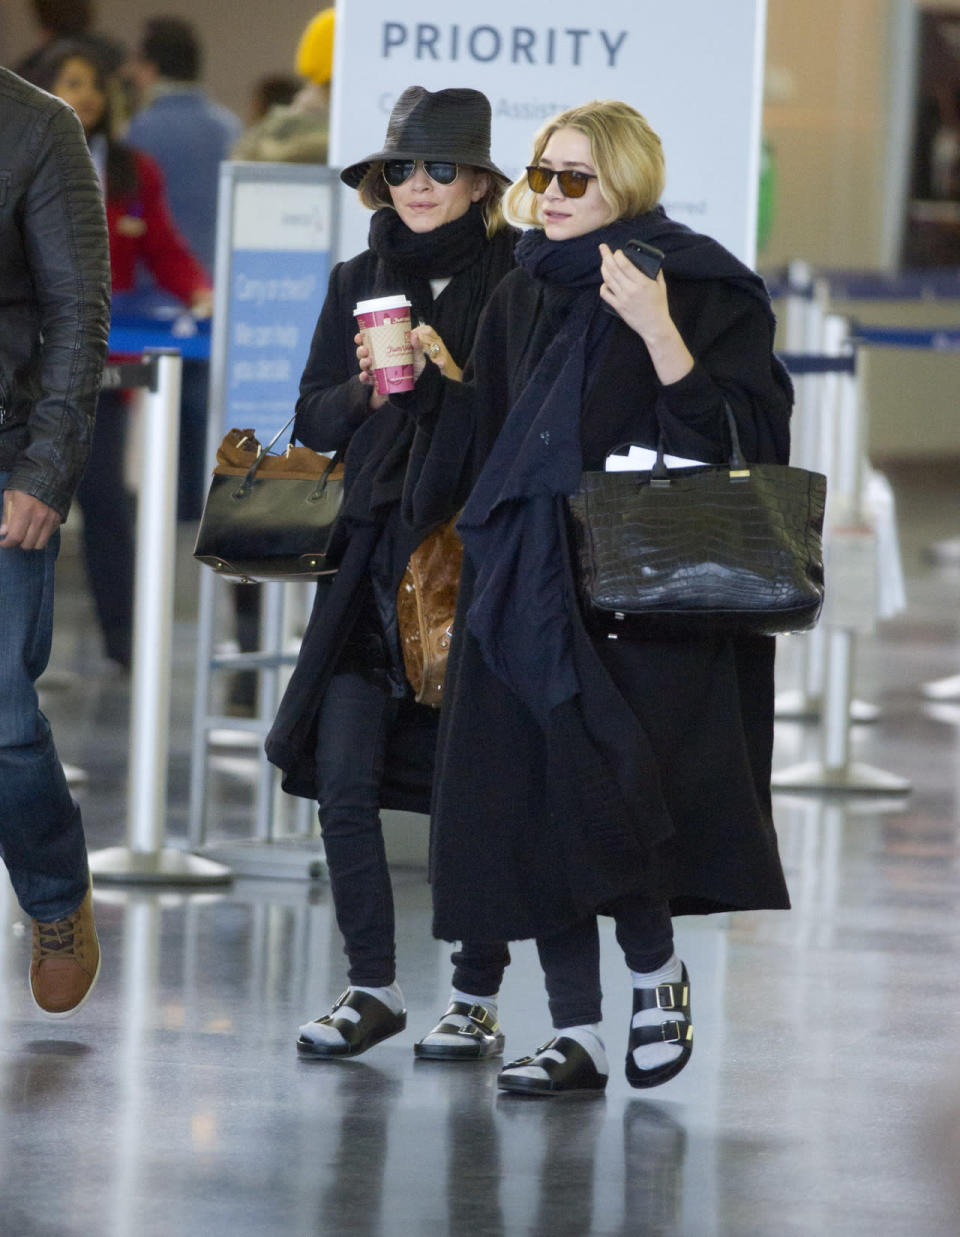 Ashley and Mary-Kate Olsen busted out all their signature looks: oversized coats, scarves, big bags, dark sunnies, Starbucks cups, and socks with sandals. They’re basically wearing Olsen twin costumes.